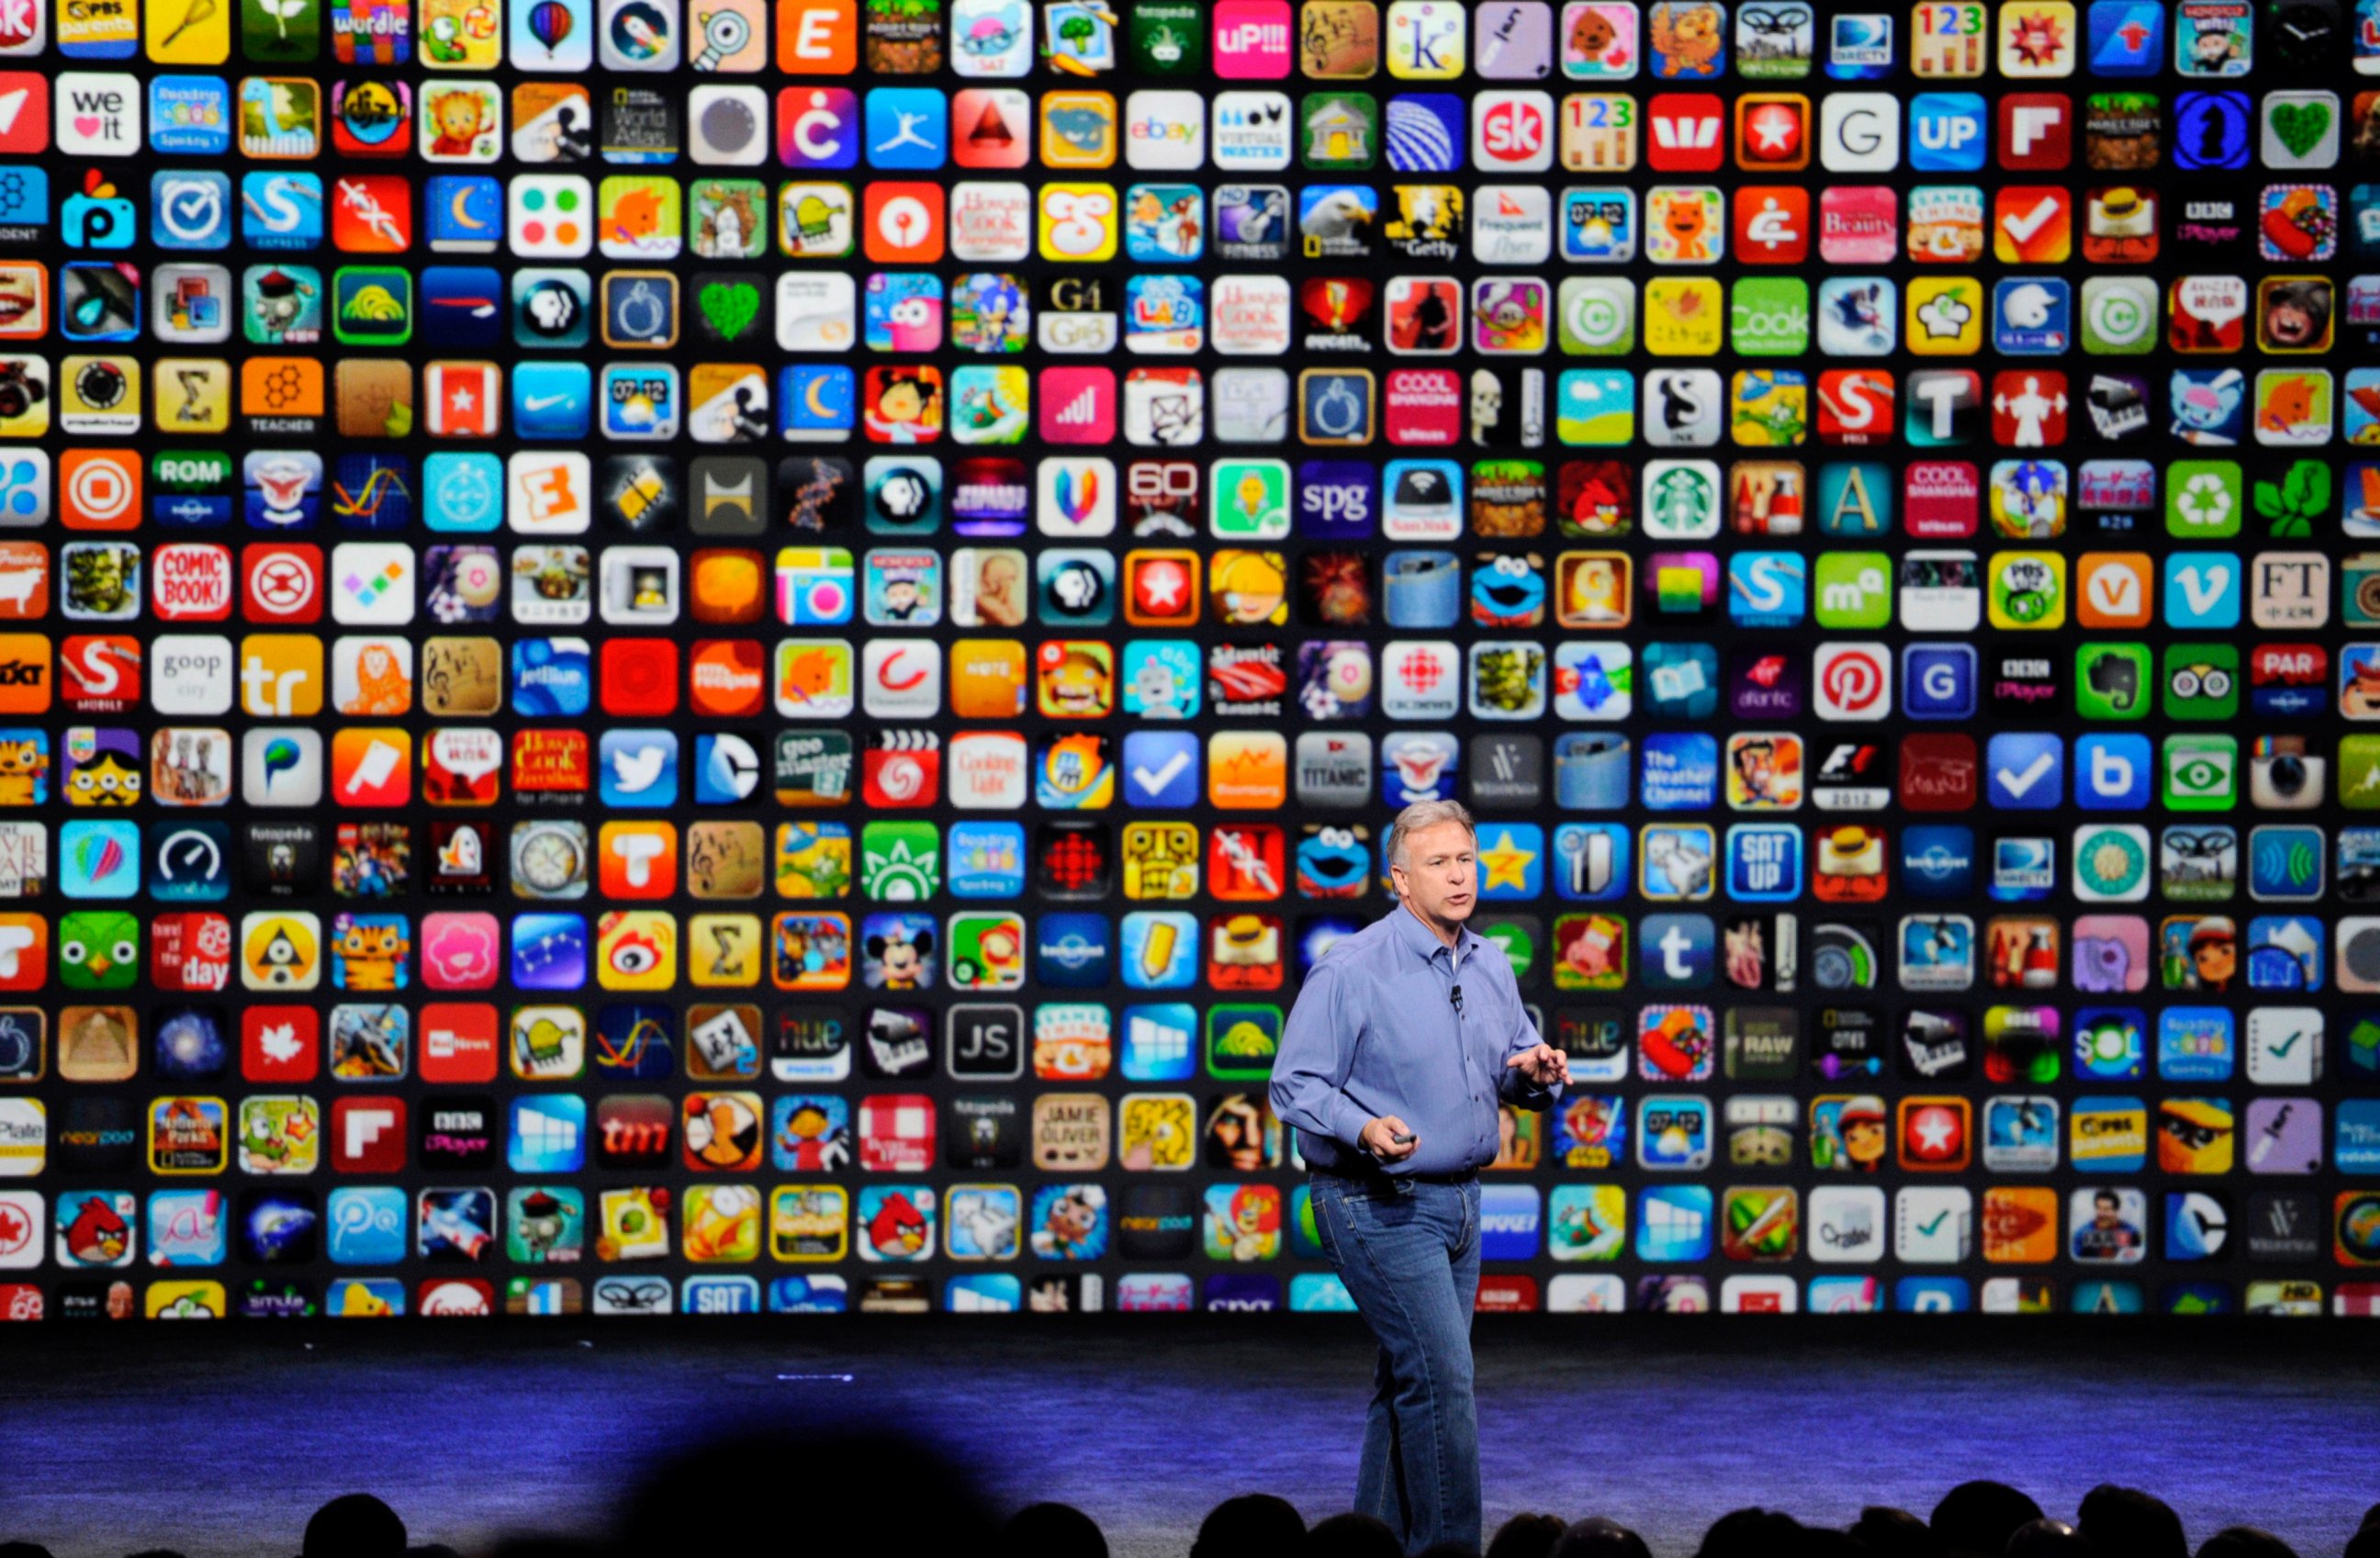 PHOTO: Philip "Phil" Schiller, senior vice president of worldwide marketing at Apple Inc., speaks about the iPhone 6 and iPhone 6 Plus during a product announcement at Flint Center in Cupertino, Calif., Sept. 9, 2014.